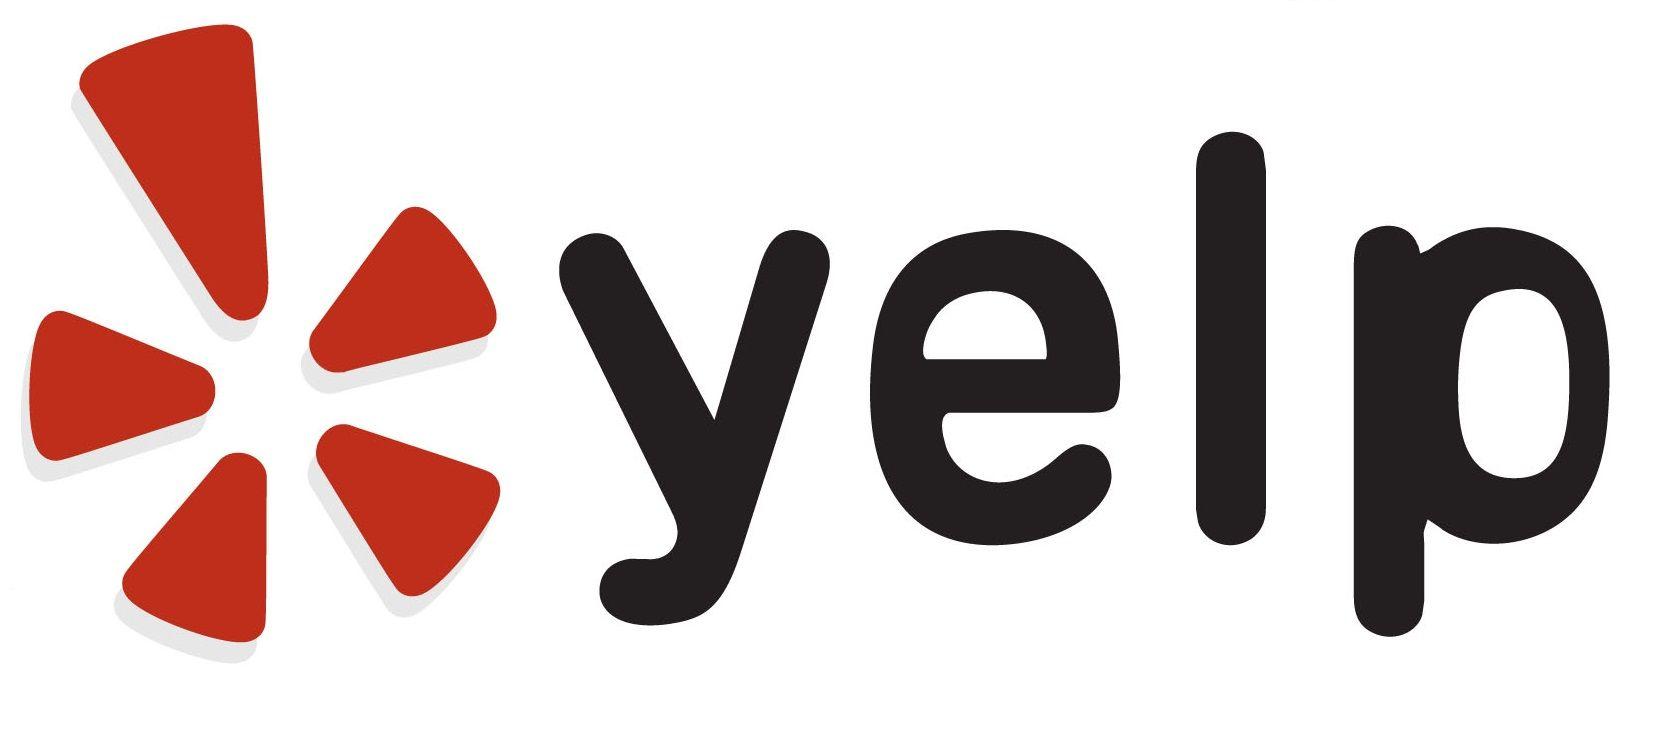 Yelp Business Logo - Yelp Incorporated. $YELP Stock. Reviewing Profits